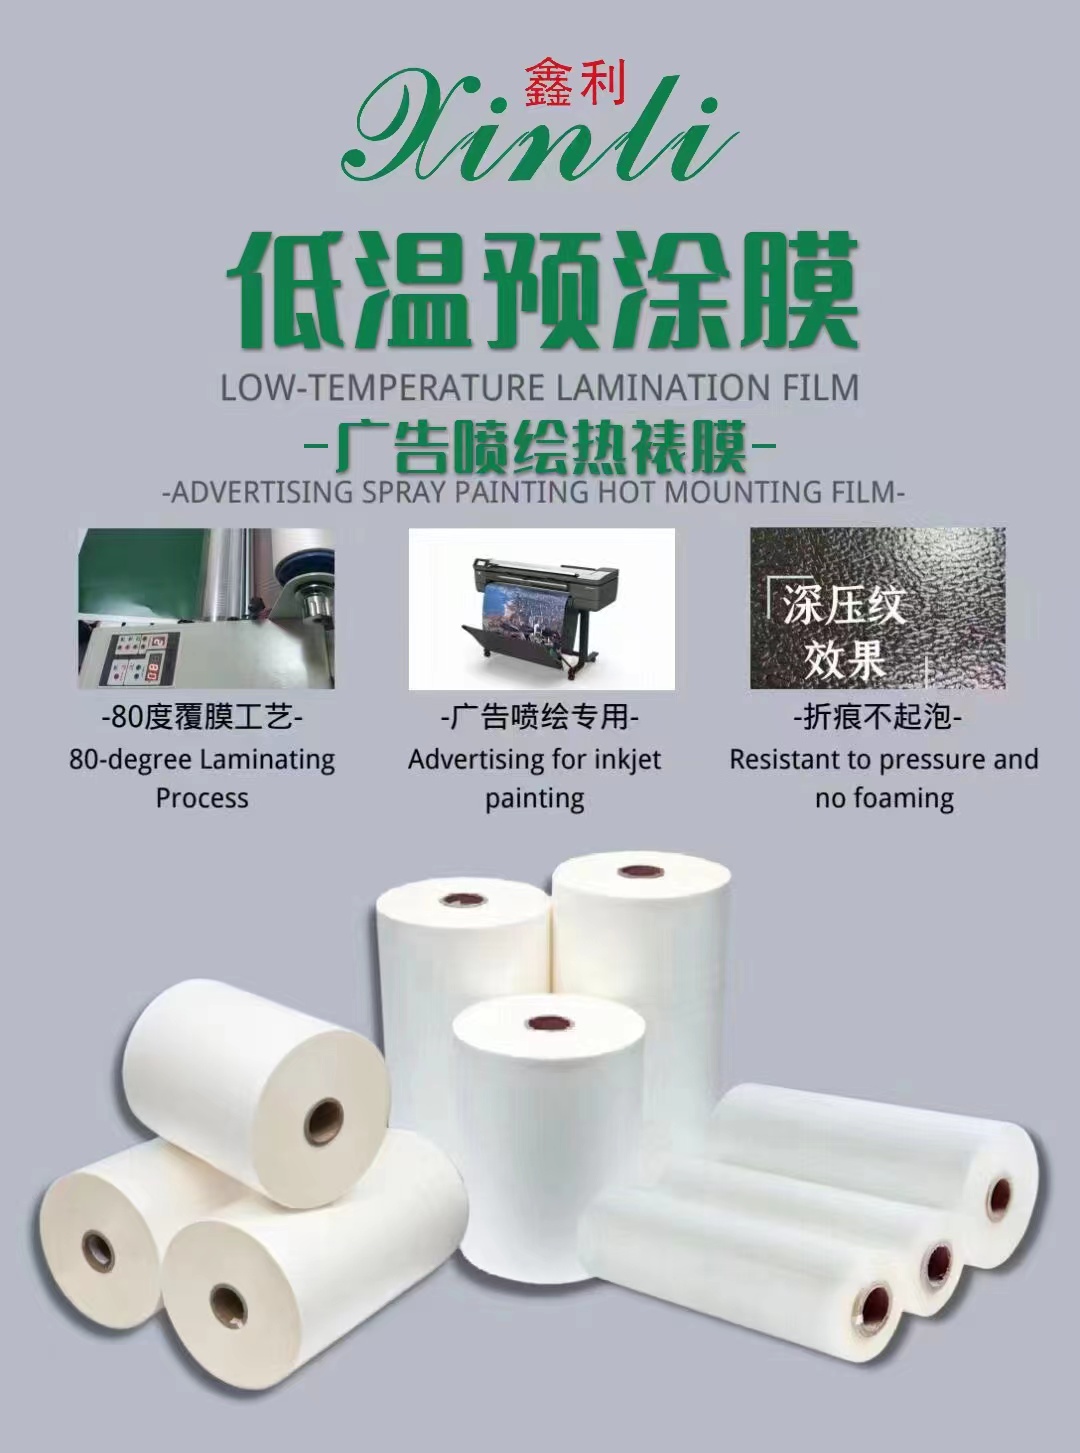 What is Low-temperature thermal lamination film?